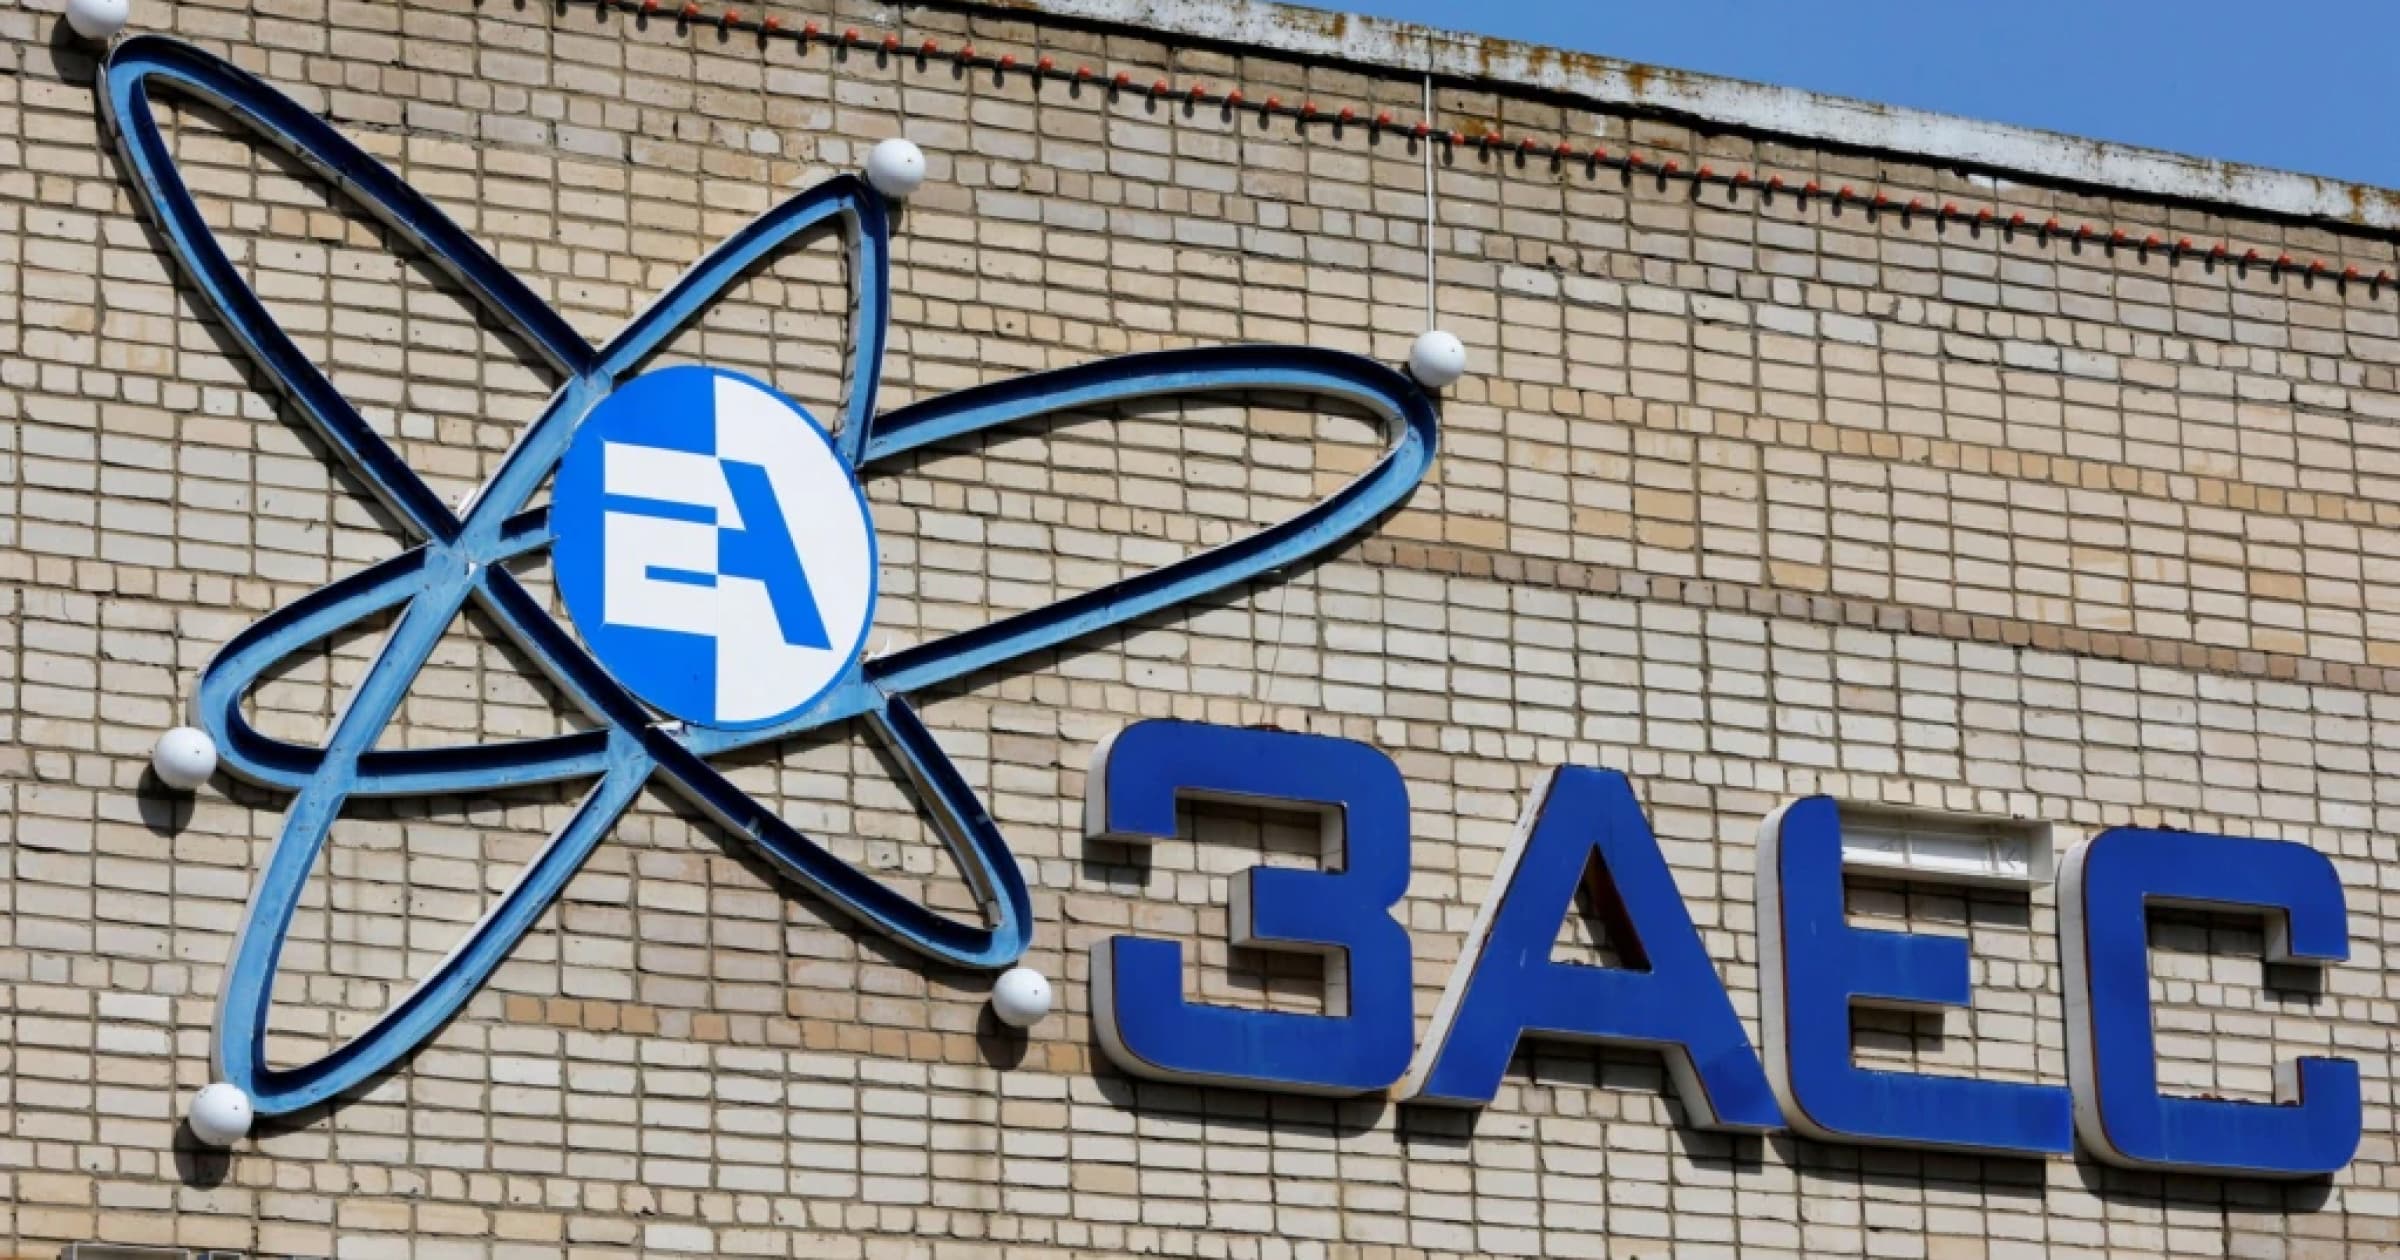 Ukraine expects that after the IAEA mission to the Zaporizhzhia NPP, the Russian military and Rosatom employees will leave the plant's territory